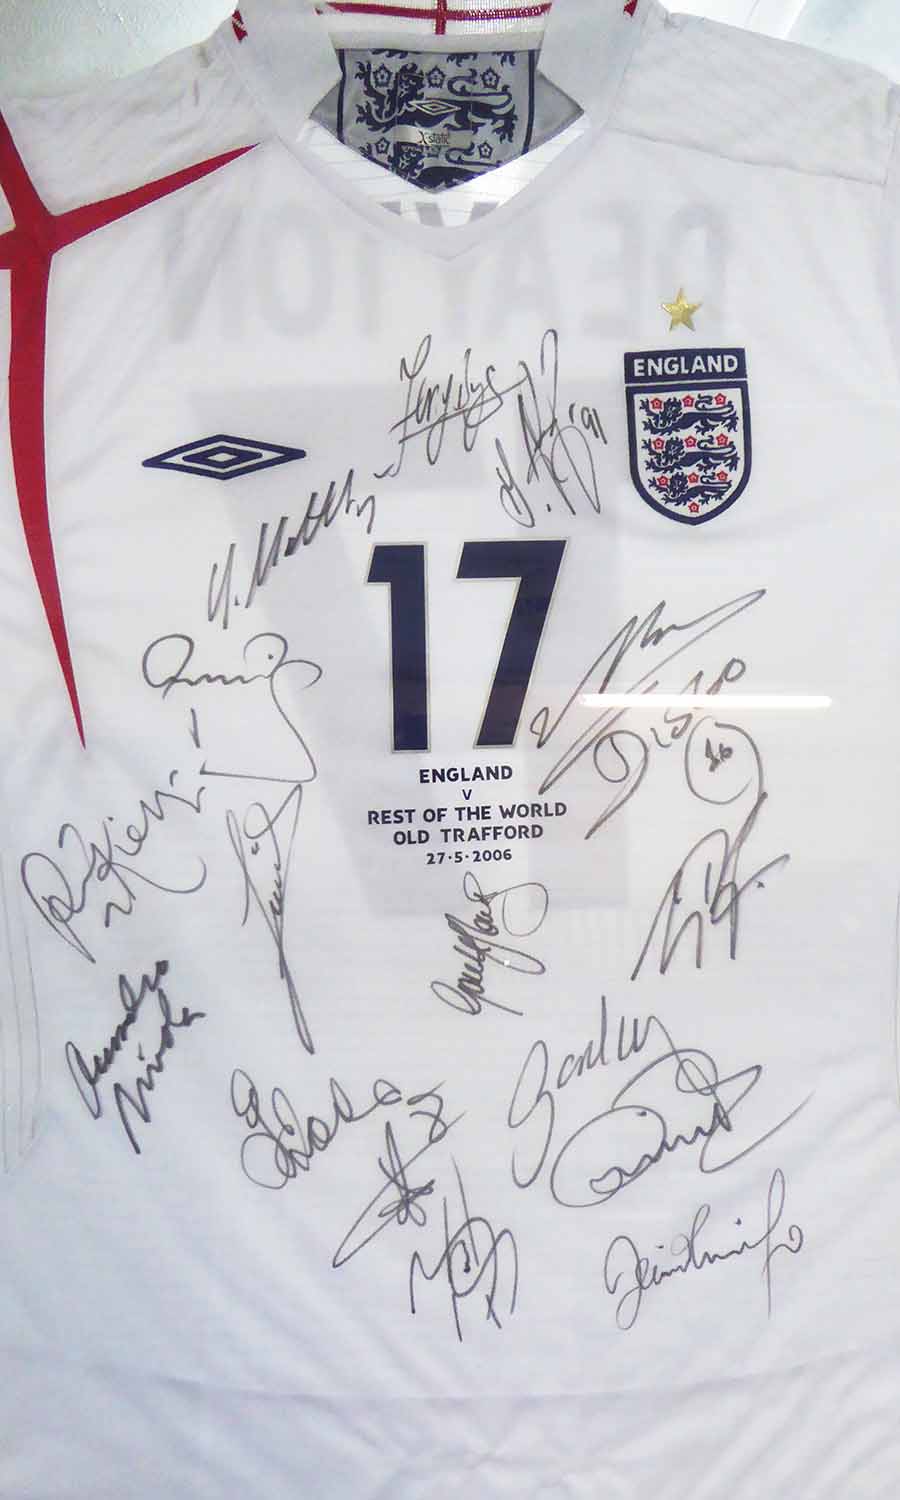 SIGNED ENGLAND 'SOCCER AID' AND FOOTBAL SHIRT, England v Rest of the ...